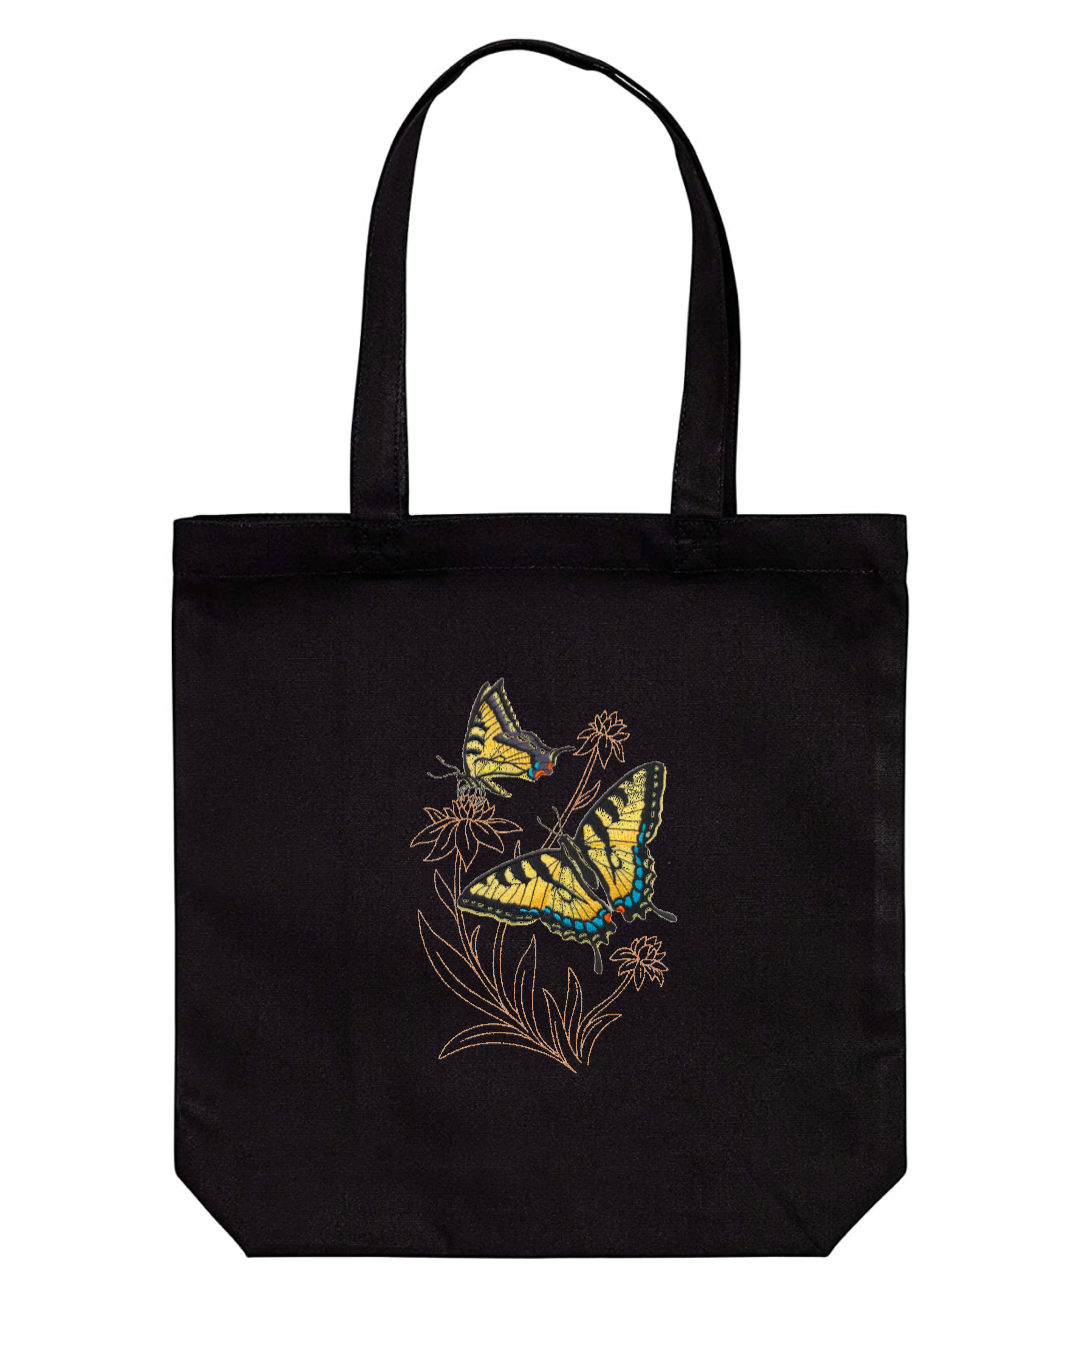 Butterflies Embroidered Cotton Canvas Market Bag. Choice of 5 different bags and 6 different butterflies